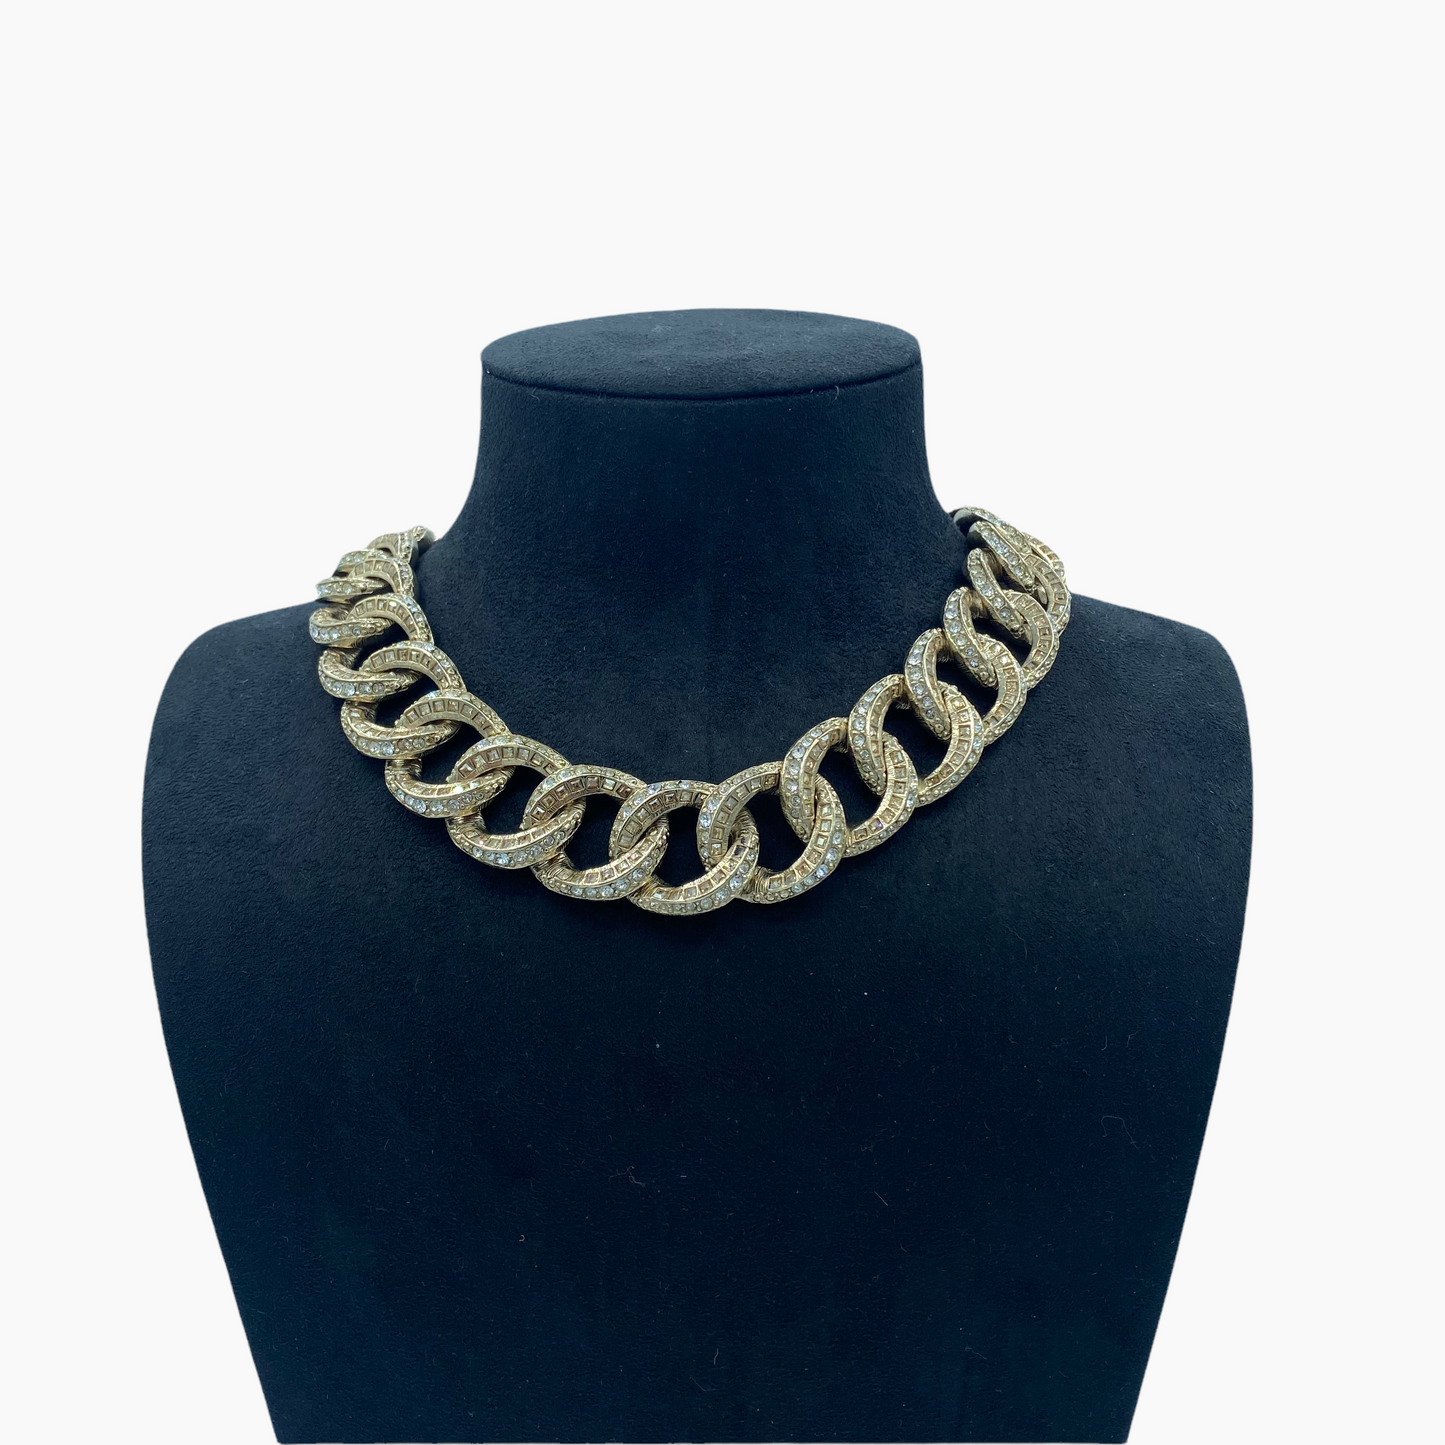 Lysis vintage Chanel chain choker necklace - 2010s